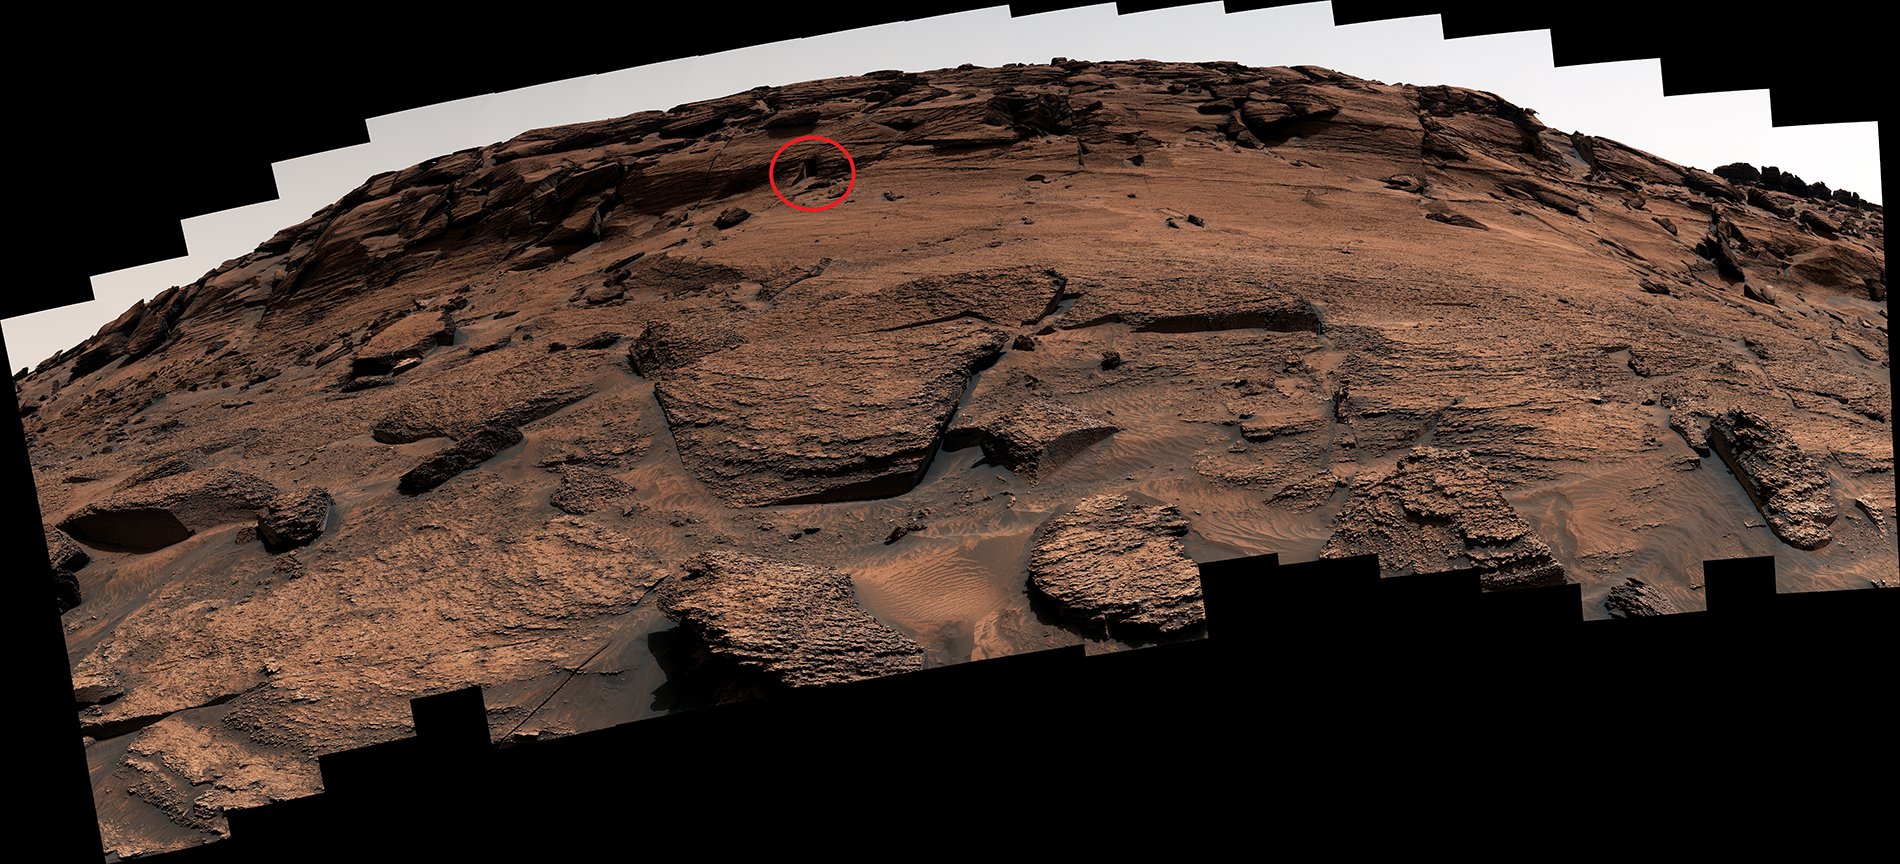 A panorama stitched together from about 100 individual Curiosity images. The 'door' is circled, and is tiny and hard to see at this scale.